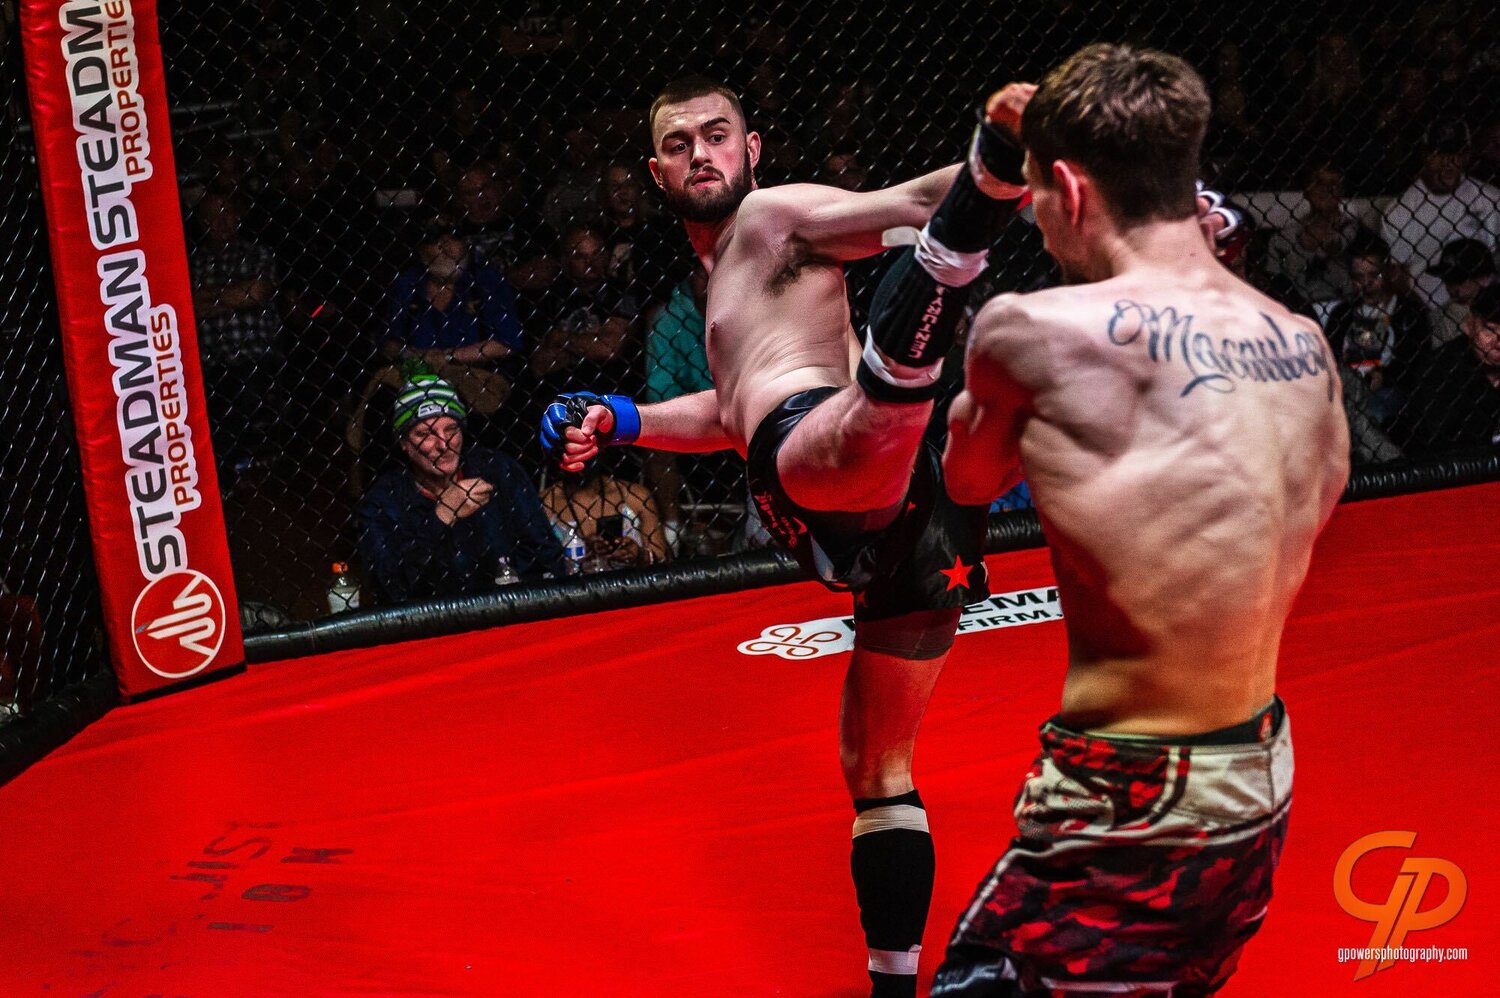 Tanner Rigdon delivers a kick during a recent MMA fight in this photo provided by Gavin Powers of G. Powers Photography.